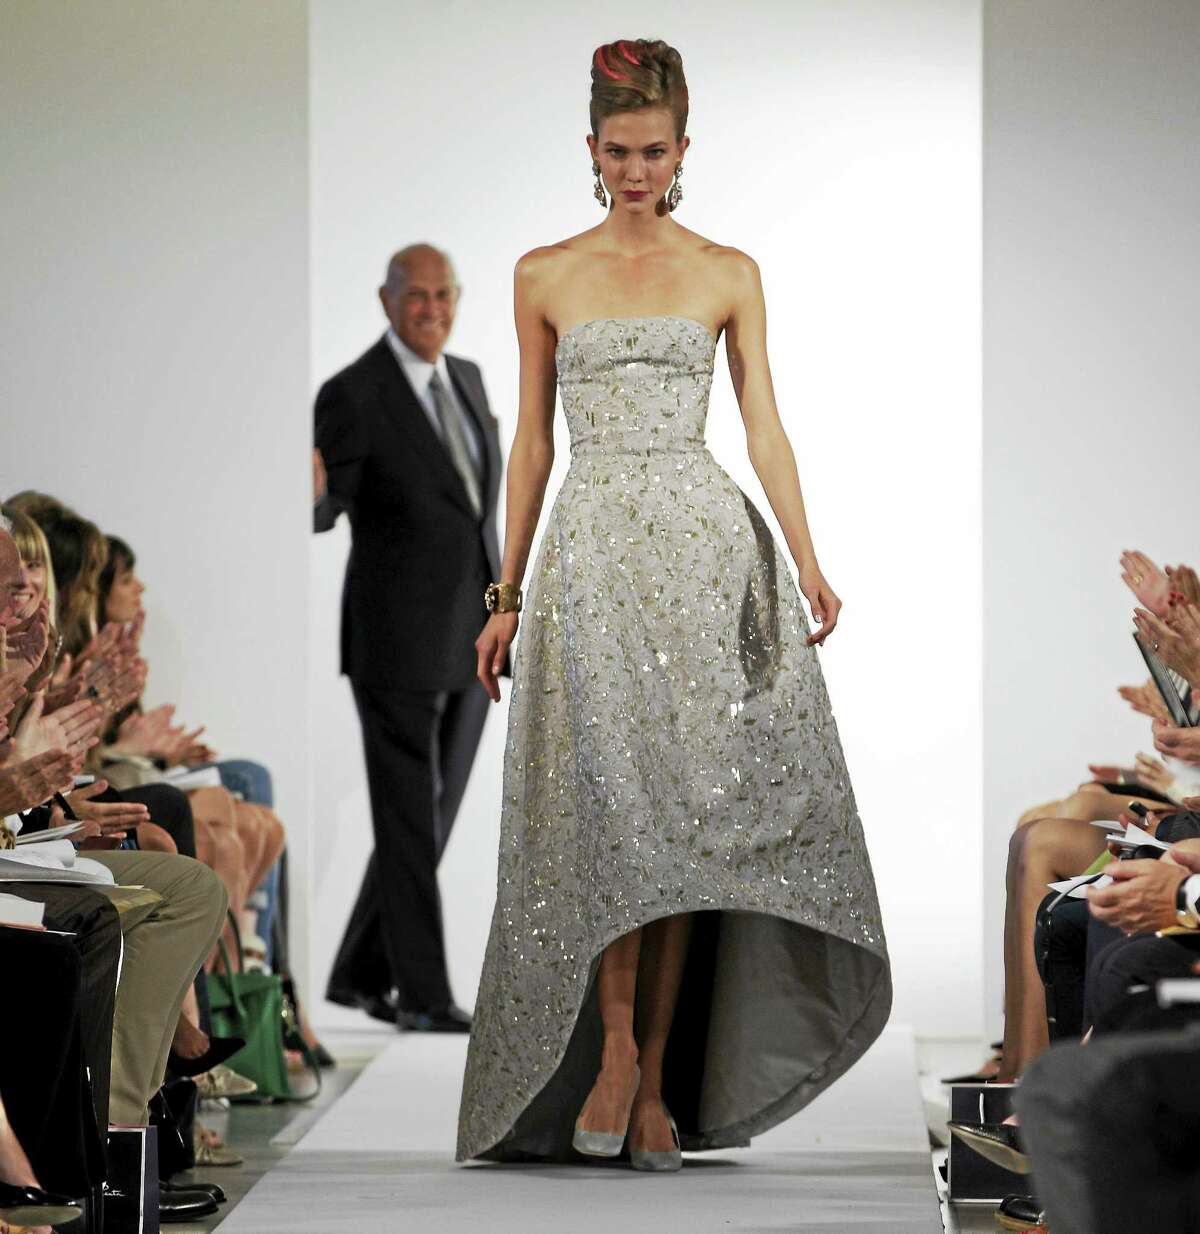 In this Sept. 11, 2012 photo, fashion designer Oscar de la Renta watches as the final model walks the runway during the presentation of his Spring 2013 collection at Fashion Week in New York.